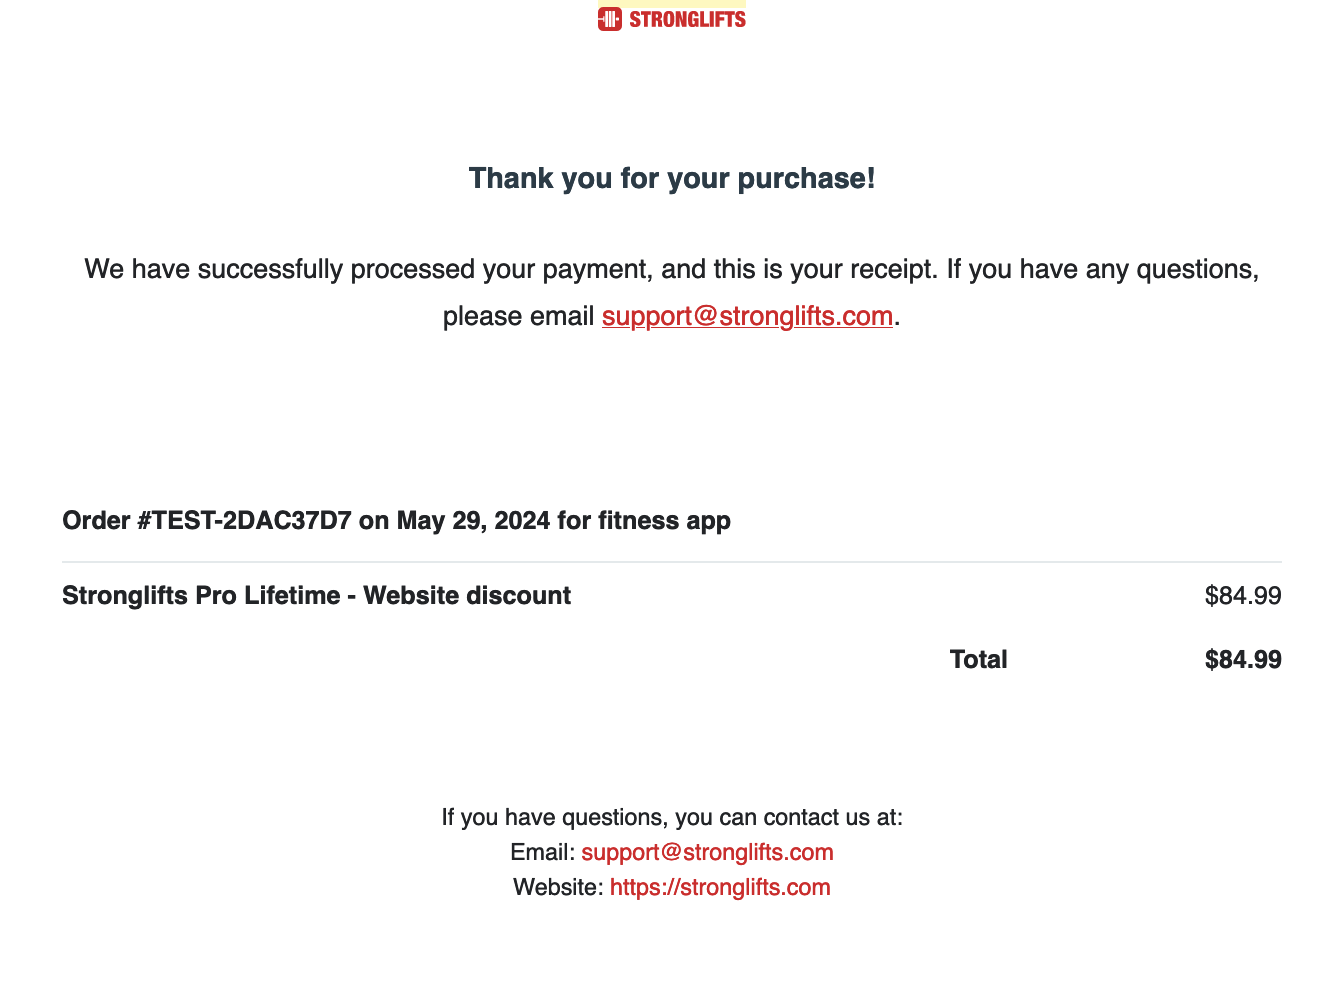 Stronglifts Pro Lifetime Receipt